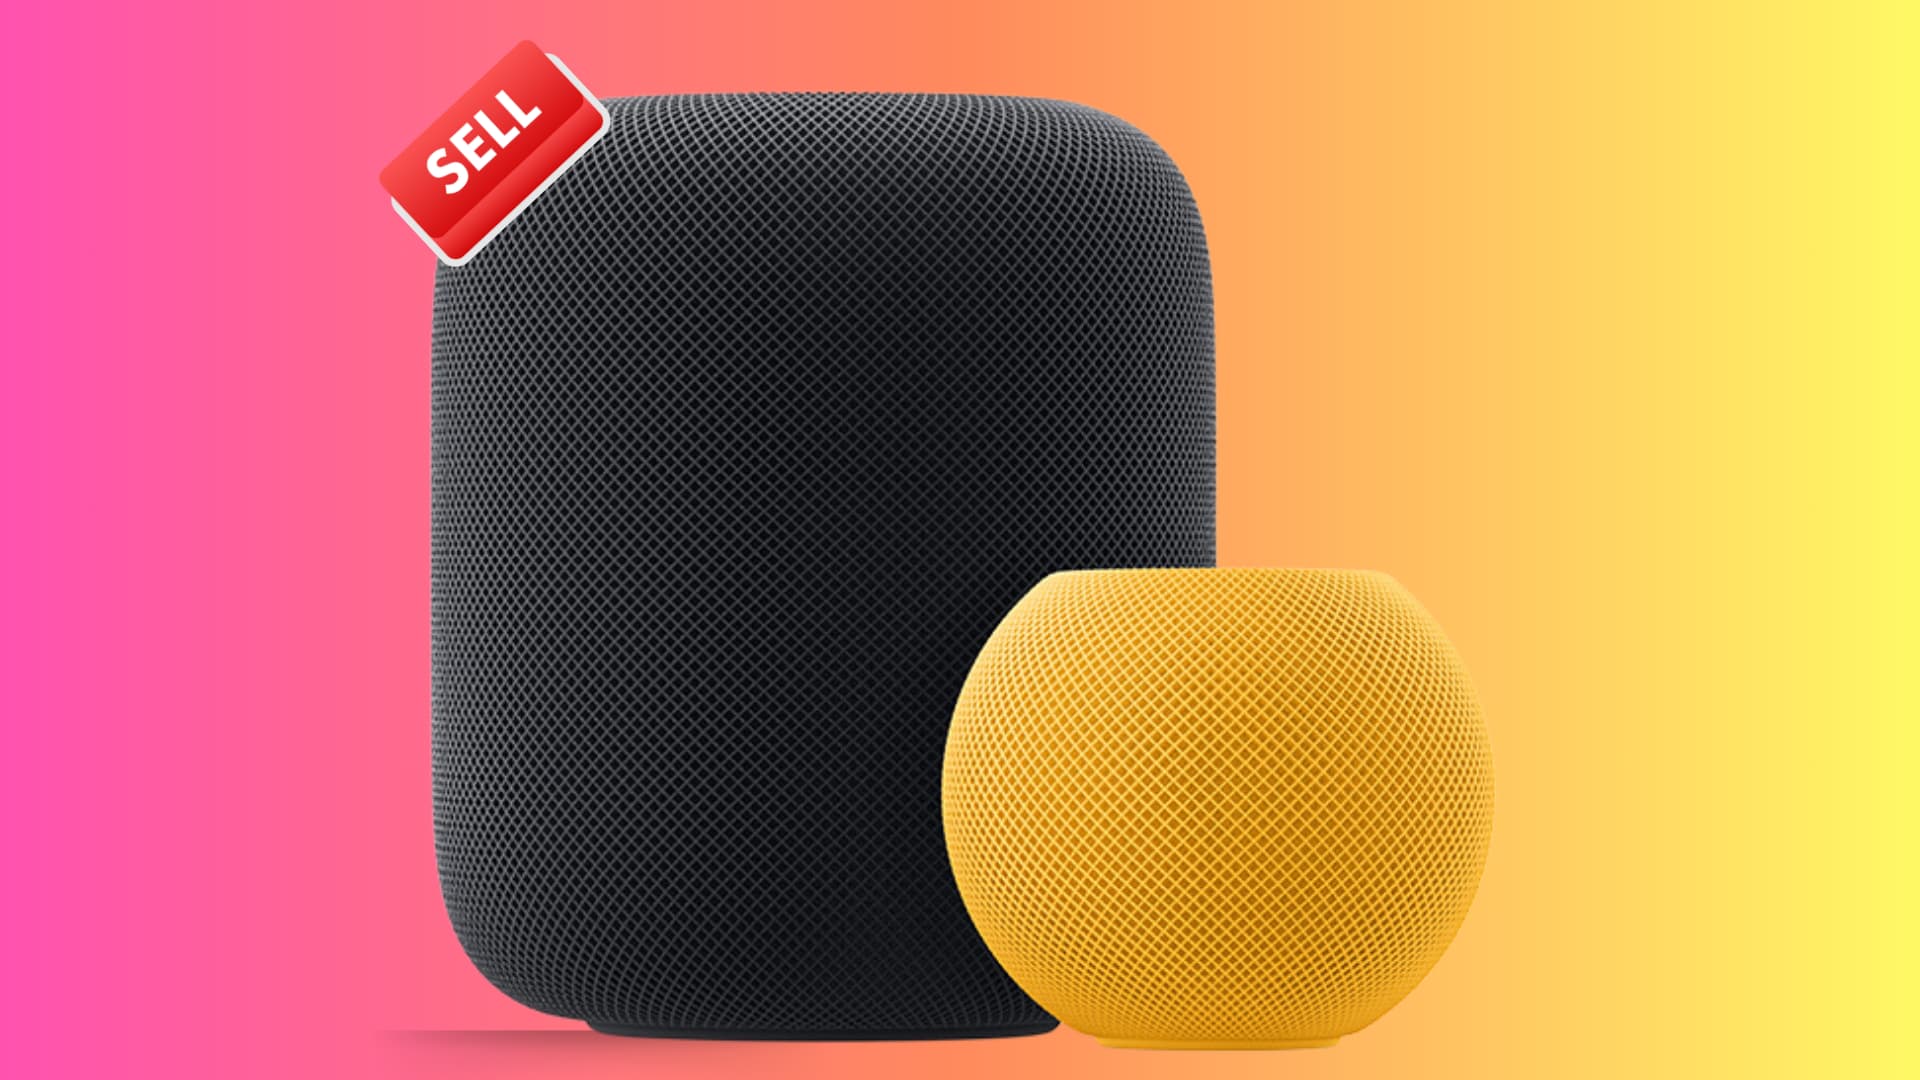 Black full size HomePod and yellow HomePod mini with a red Sell tag